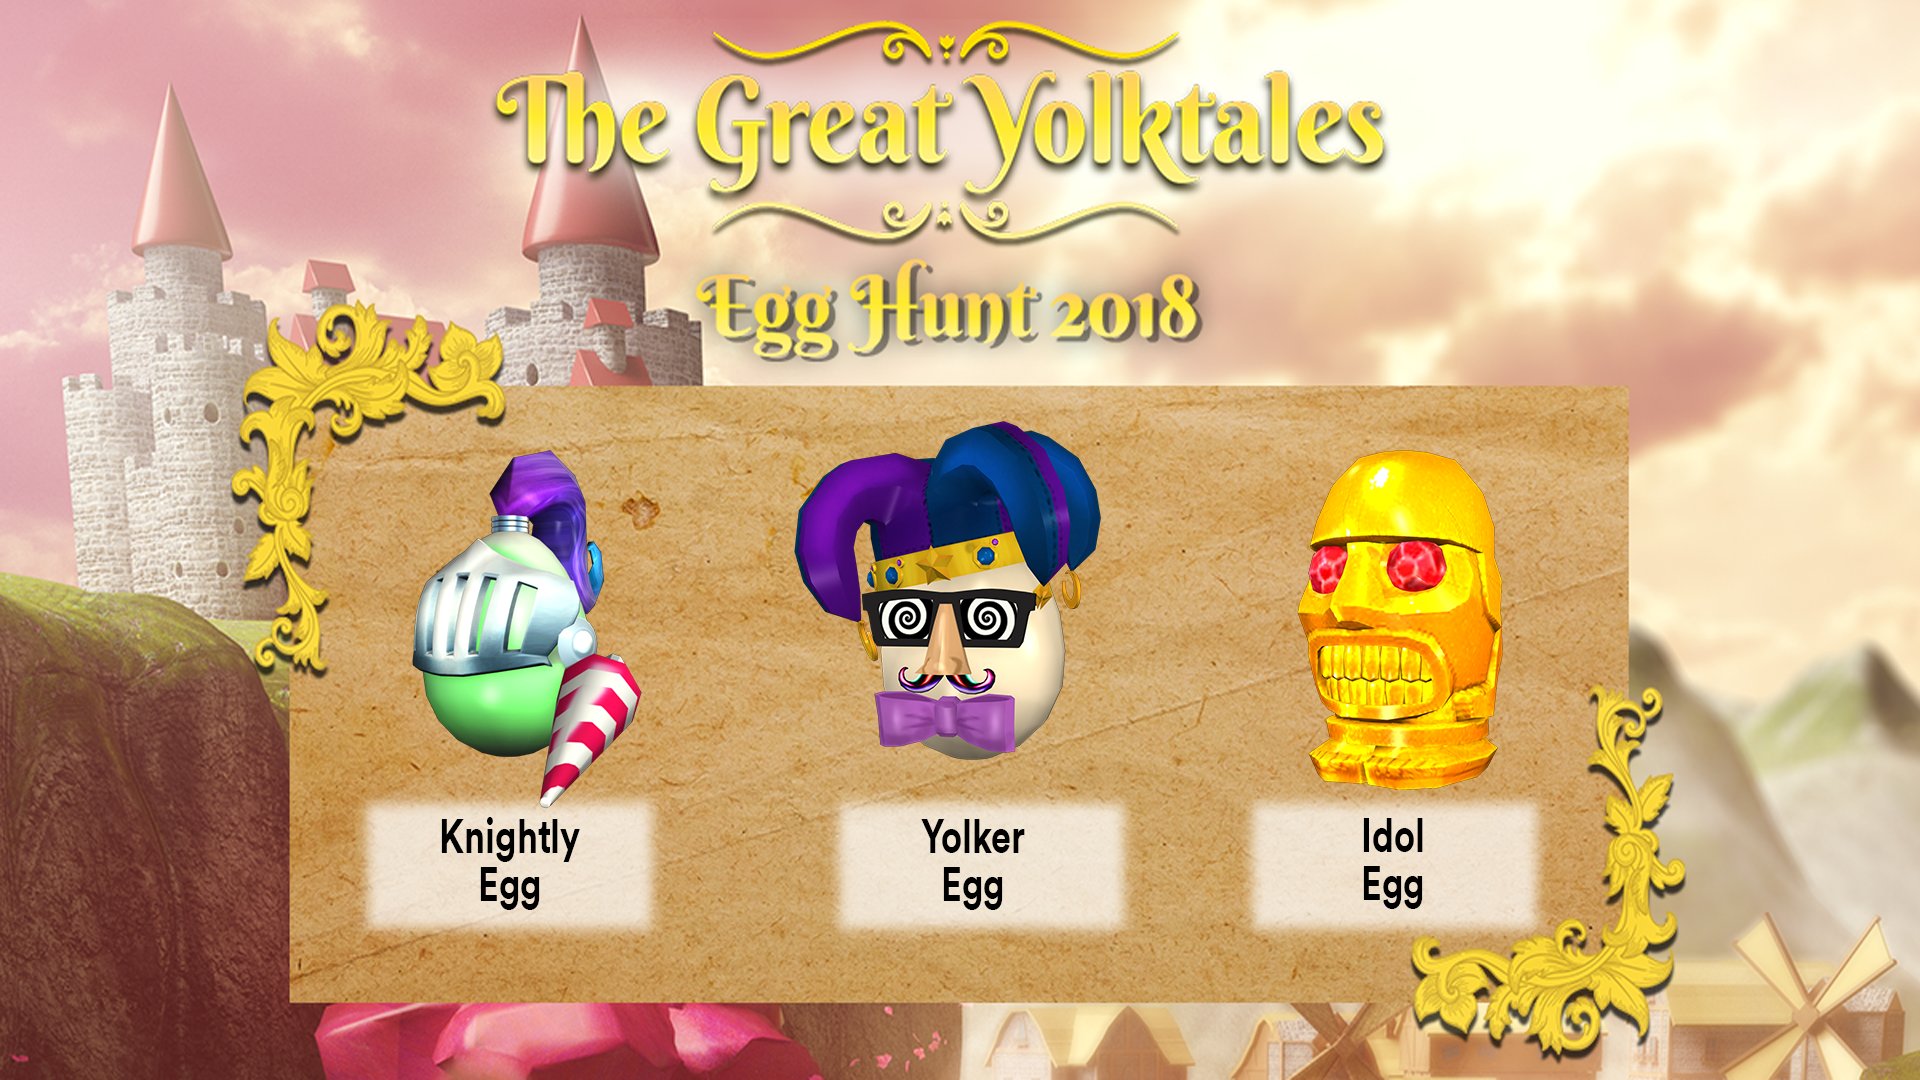 Roblox On Twitter We Hope Revealing Three Eggs During The Stream Yesterday Wasn T Too Egg Streme You Unveiled The Knightly Egg Yolker Egg And Idol Egg Https T Co F4f5hbe8rt - idol egg roblox